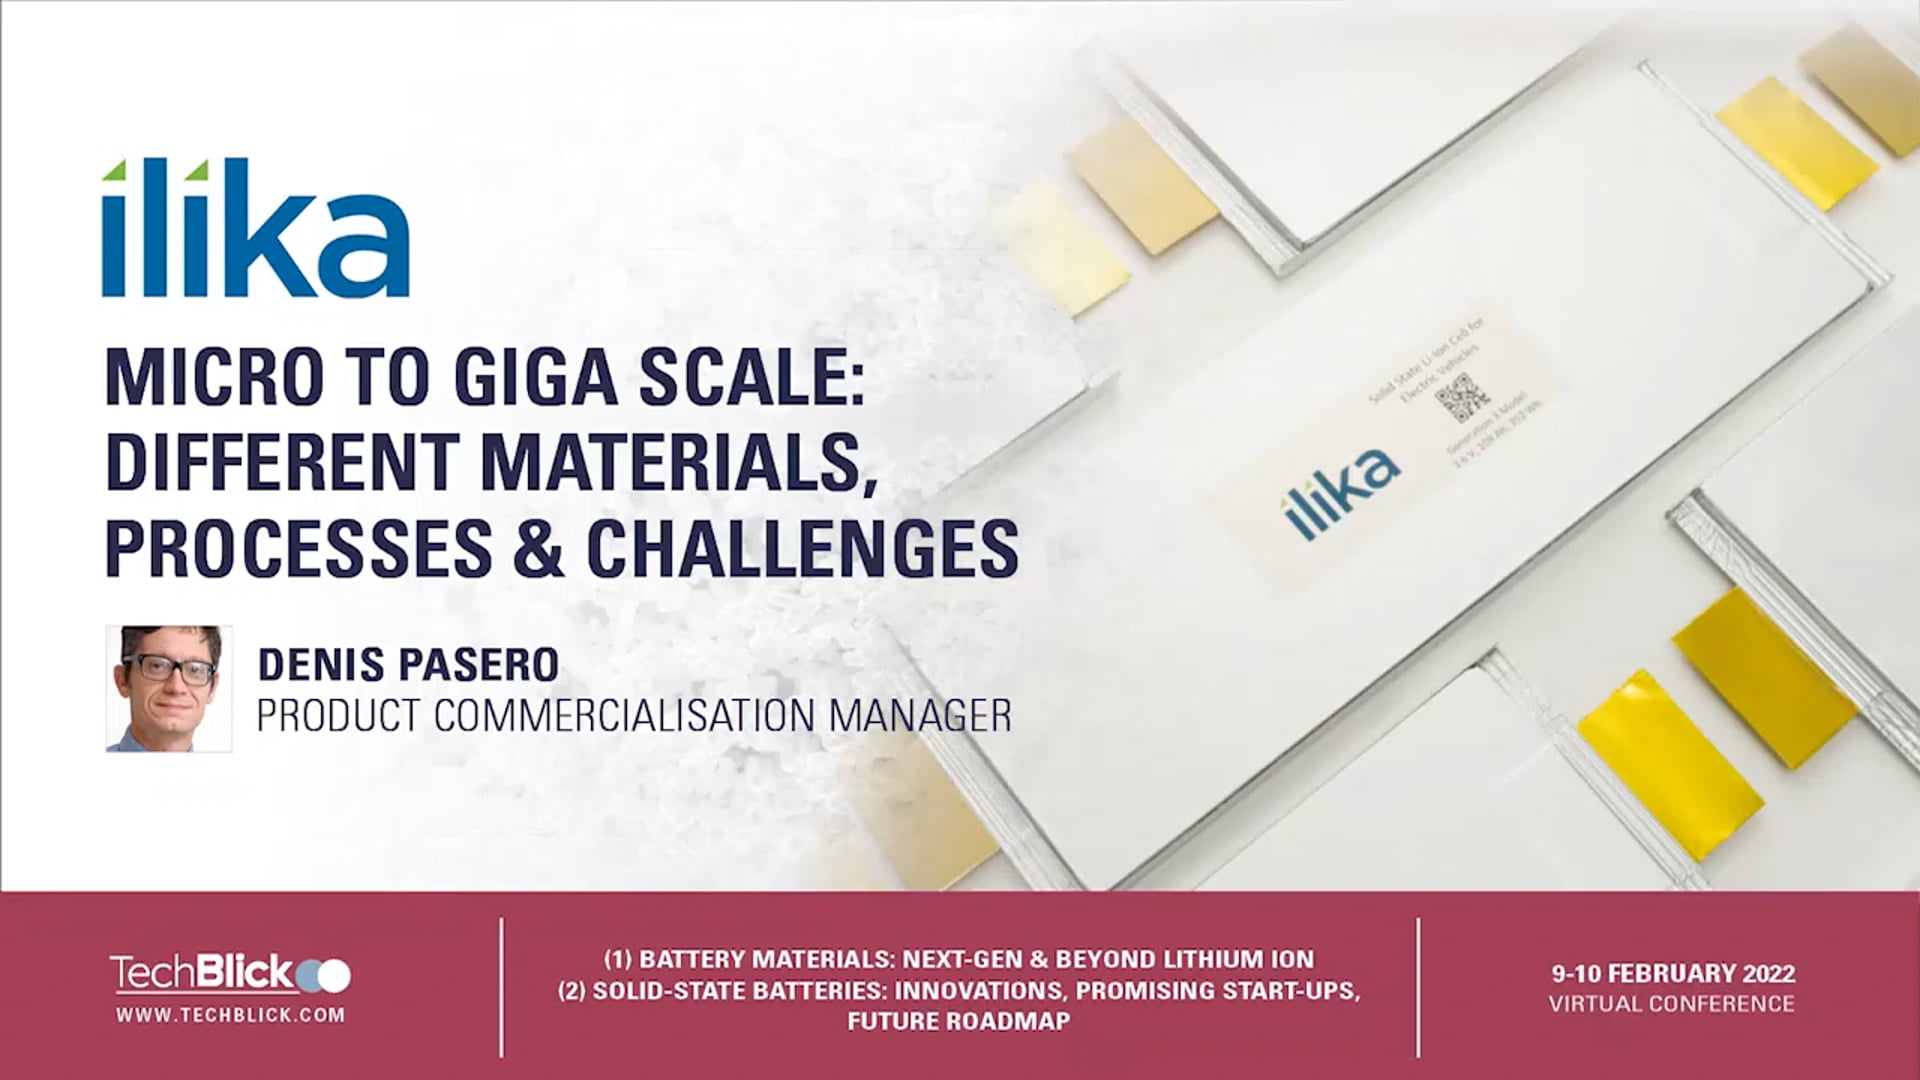 Ilika - Micro to Giga Scale: Different Materials, Processes and Challenges